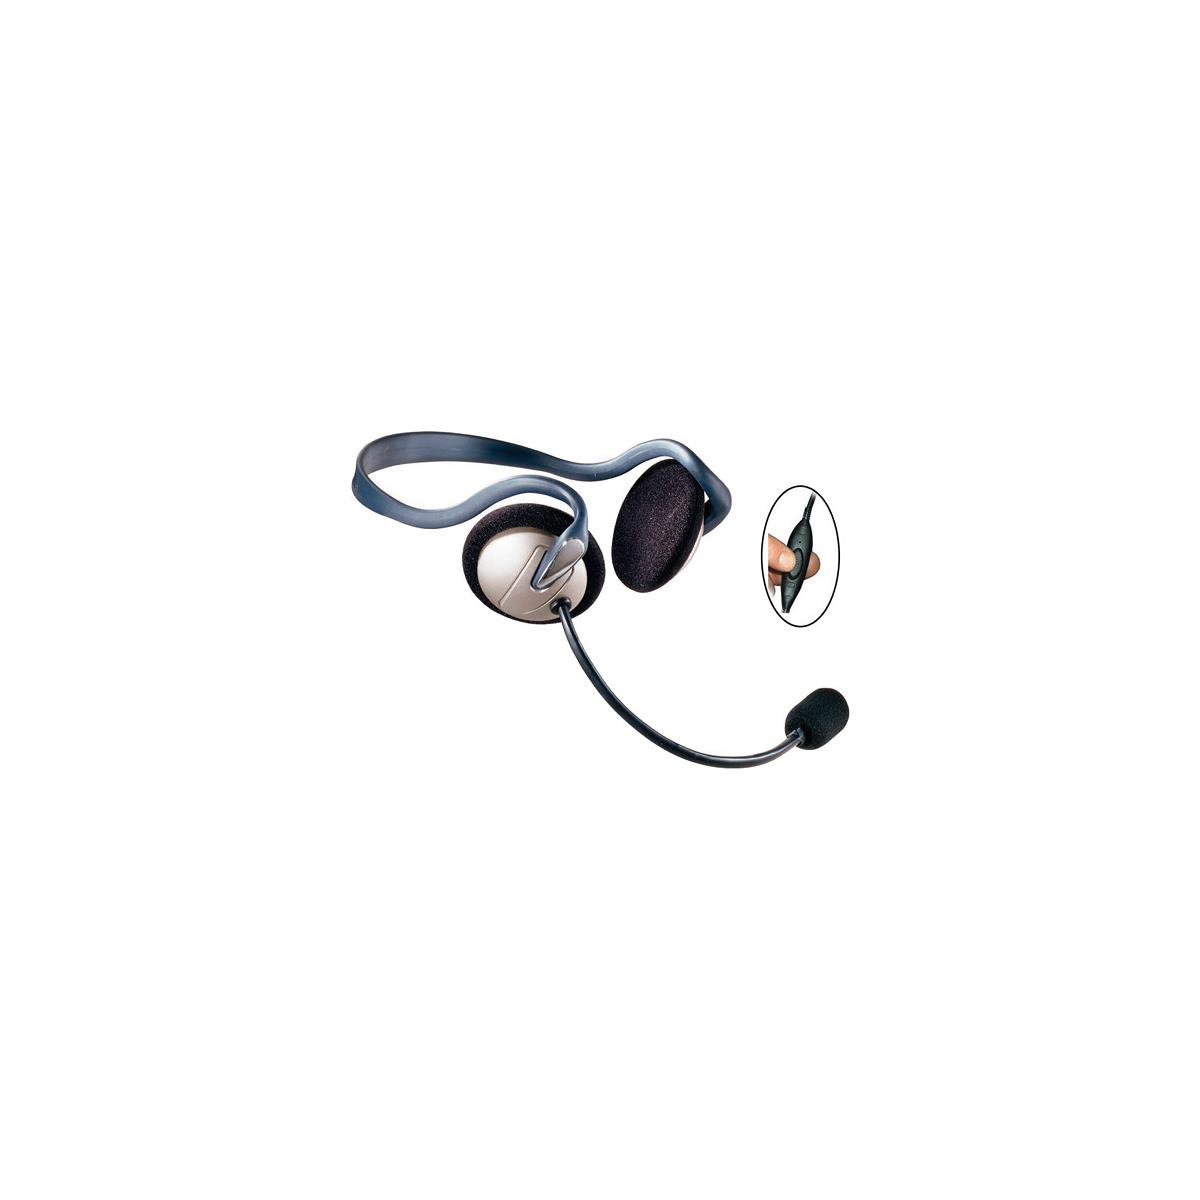 Image of Eartec Monarch Inline PTT Headset with Mic for SC-1000 2-Way Radios